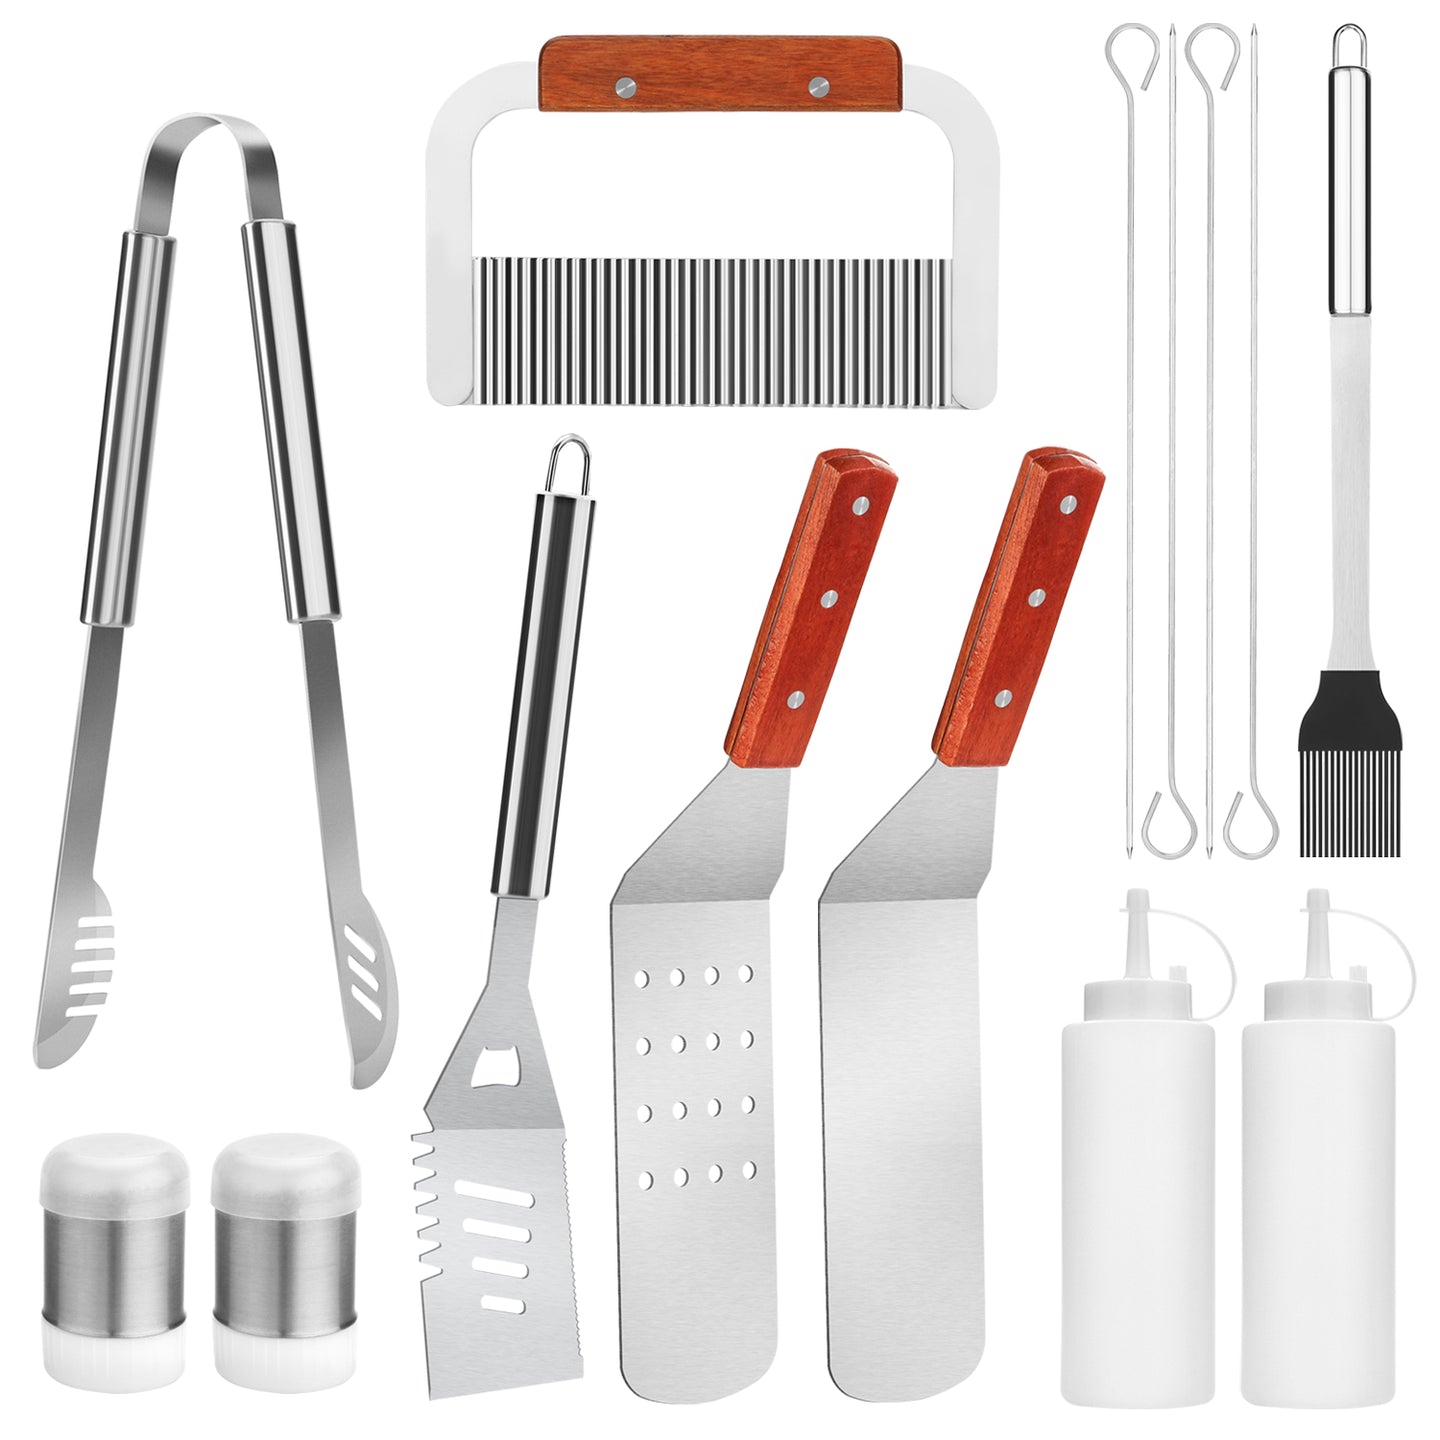 IMAGE BBQ Grill Tool Set, 14 PIECES Large Heavy Duty Stainless Steel Grilling Accessories, Durable In Use Grilling Kit for Cooking, Backyard Barbecue,Outdoor Camping